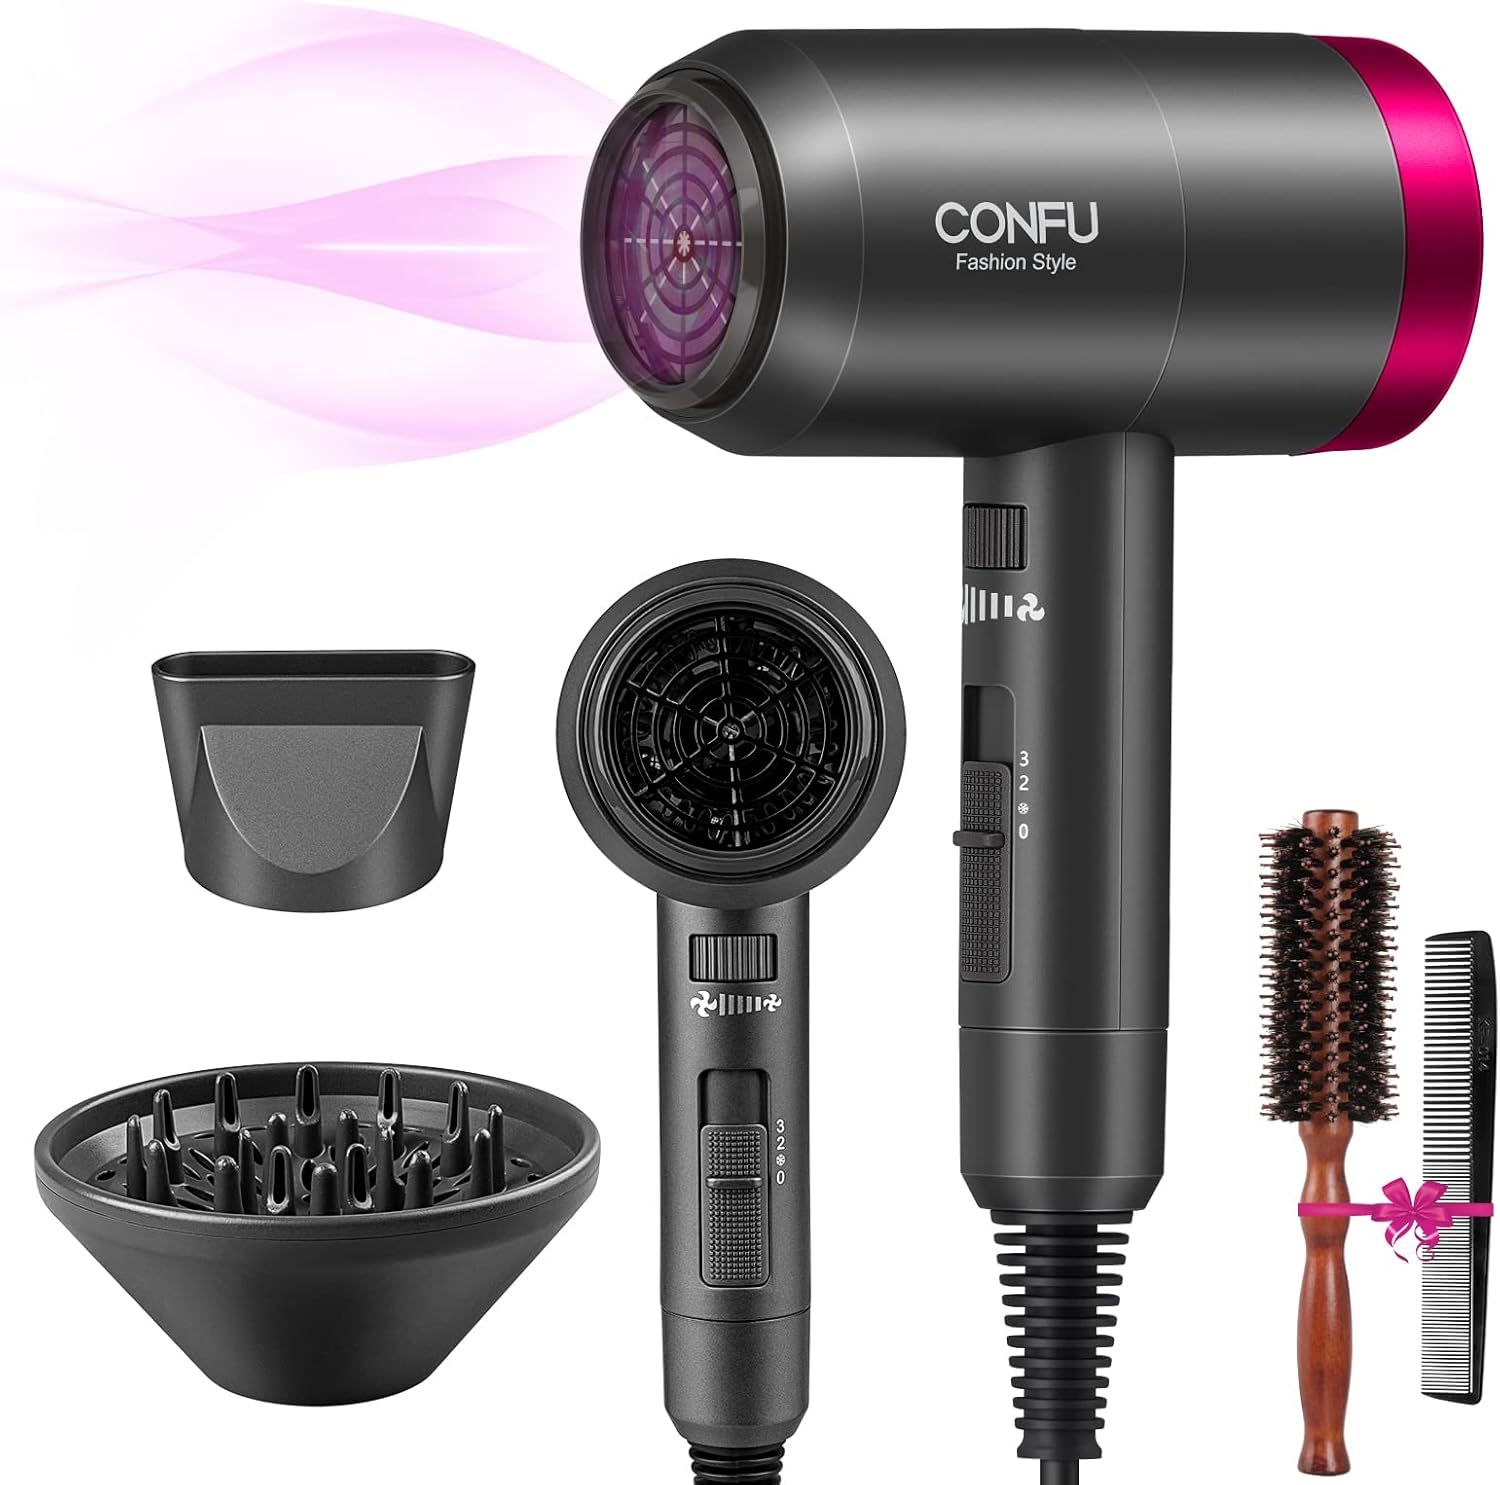 CONFU Hair Dryer, 1800W Hair Dryer, Hair Dryer with Diffuser, Blow Dryer for Home, 3 Heat Settings,  | Amazon (US)